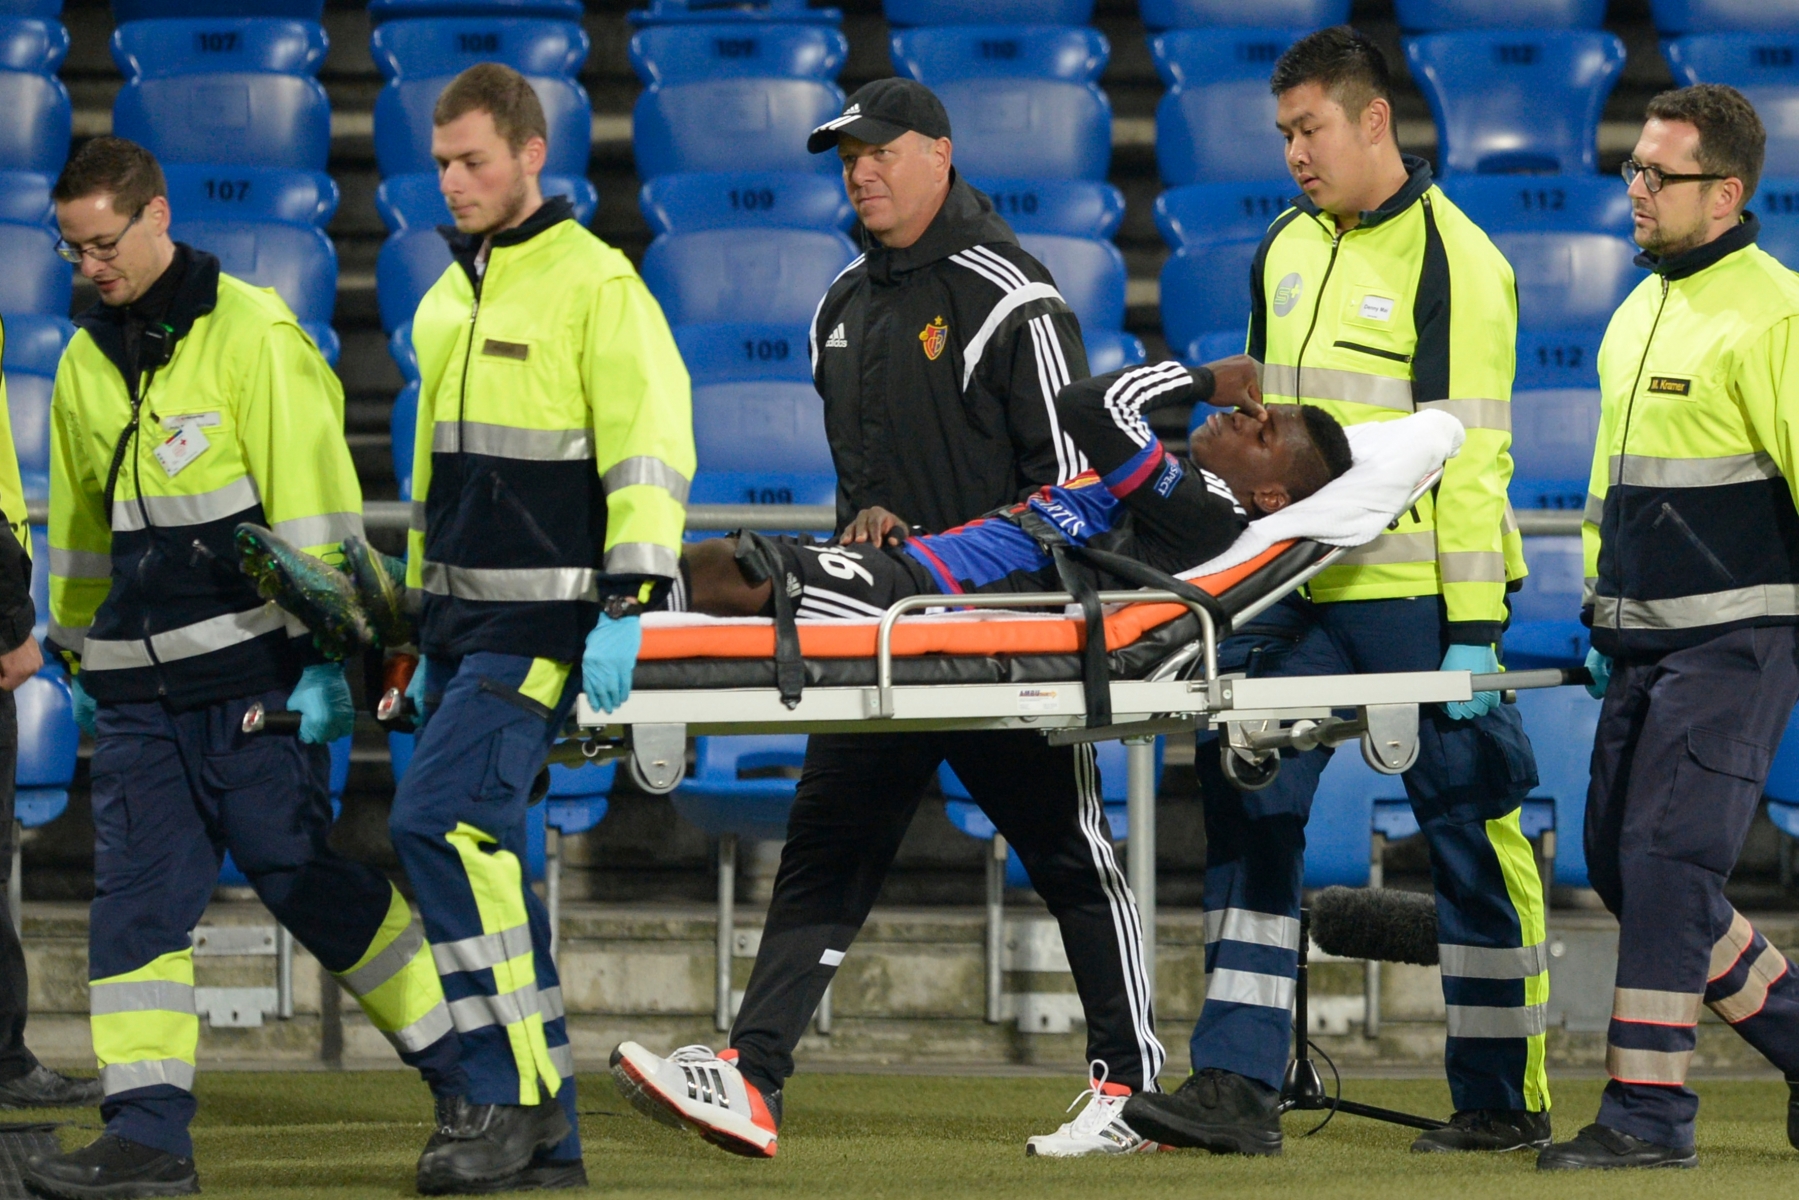 Basel's injured Breel Embolo has to leave the pitch during the UEFA Europa League group I group stage matchday 3 soccer match between Switzerland's FC Basel 1893 and Portugal's C.F. Os Belenenses at the St. Jakob-Park stadium in Basel, Switzerland, on Thursday, October 22, 2015. (KEYSTONE/Georgios Kefalas) SOCCER EUROPA LEAGUE BASEL BELENENSES